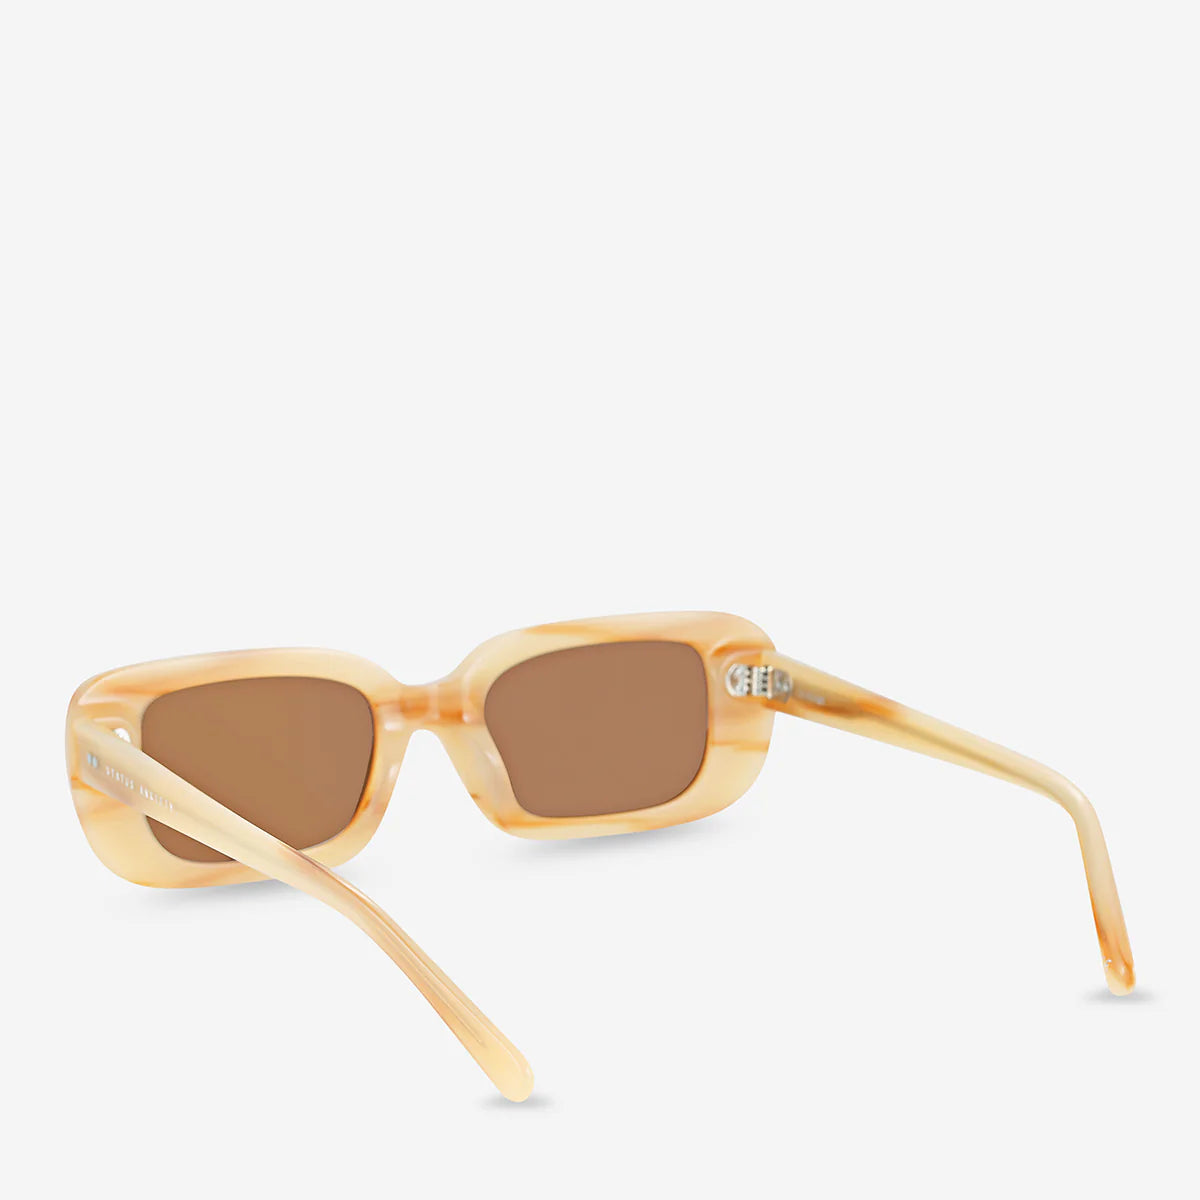 Solitary Sunglasses in Blonde